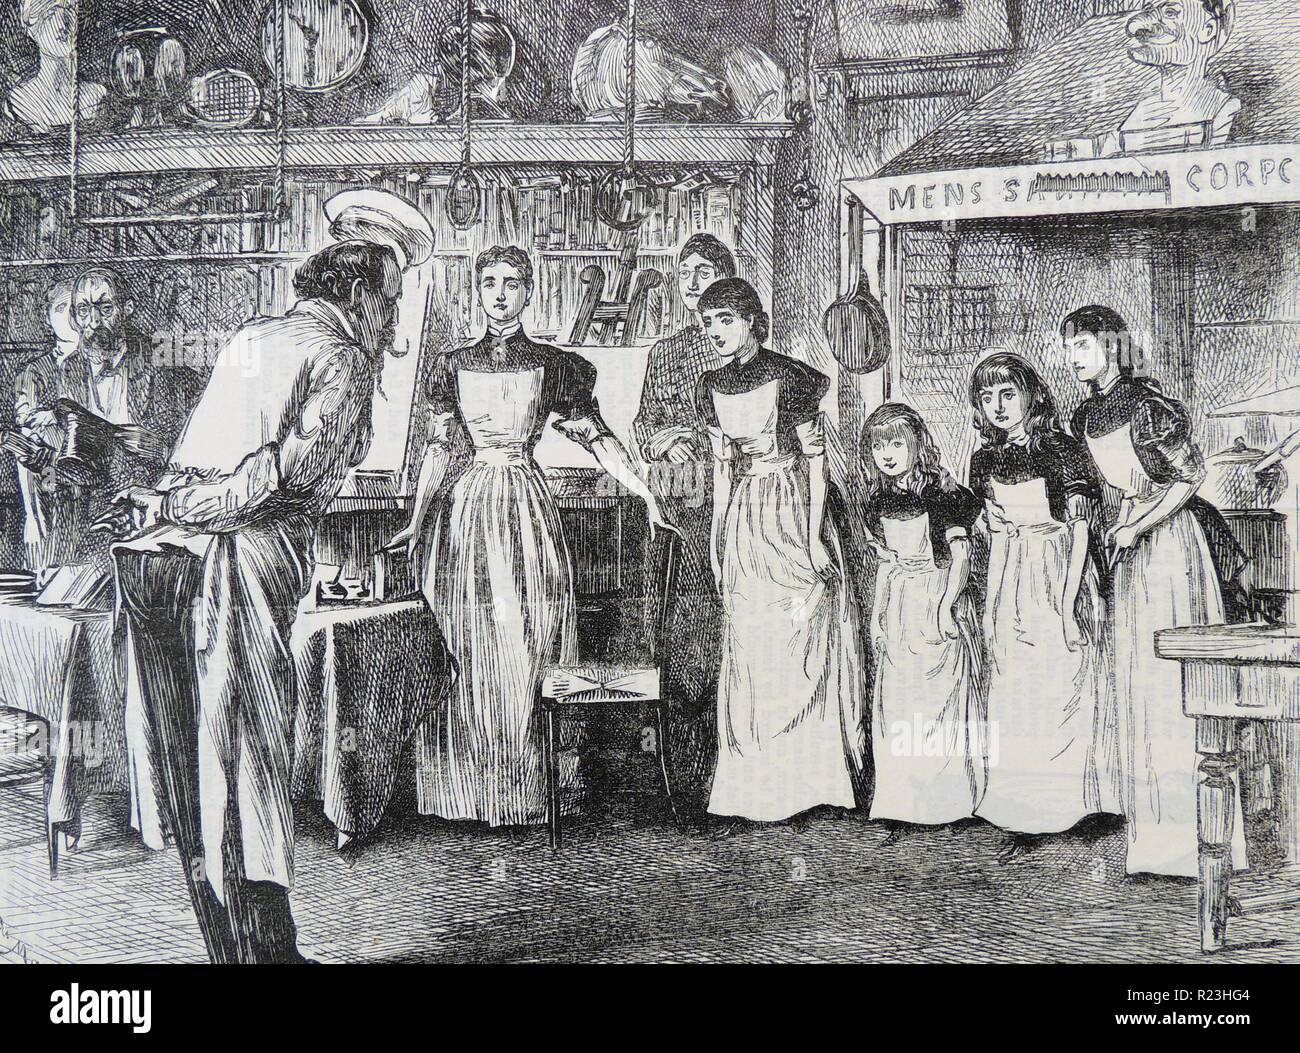 THE SCHOOL-ROOM AS IT OUGHT TO BE: Music master, left, slips away as five daughters of the house meet their new master who champions a healthy diet which, with gymnastic exercise (apparatus hanging from ceiling), will form them into active Modern women. George du Maurier cartoon from ''Punch'', London, 1879. Stock Photo